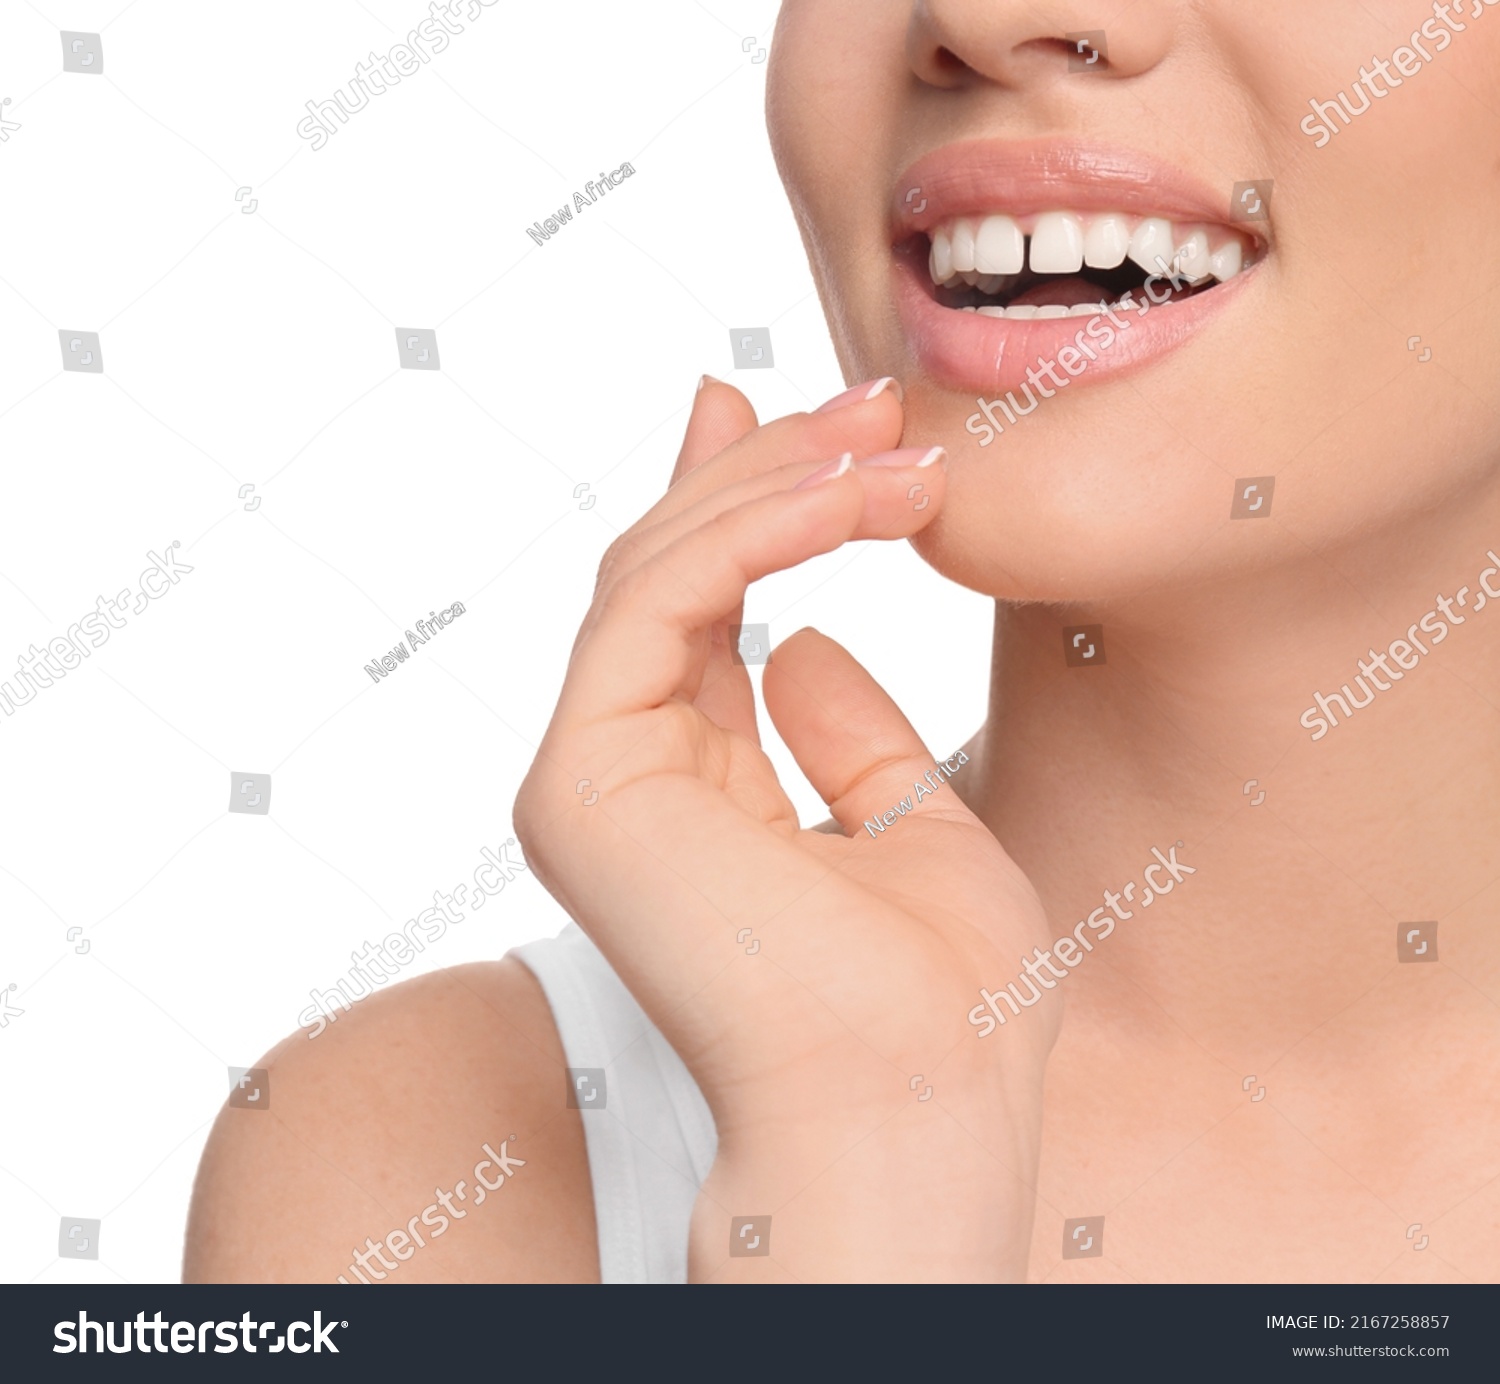 Woman with diastema between upper front teeth on white background, closeup #2167258857